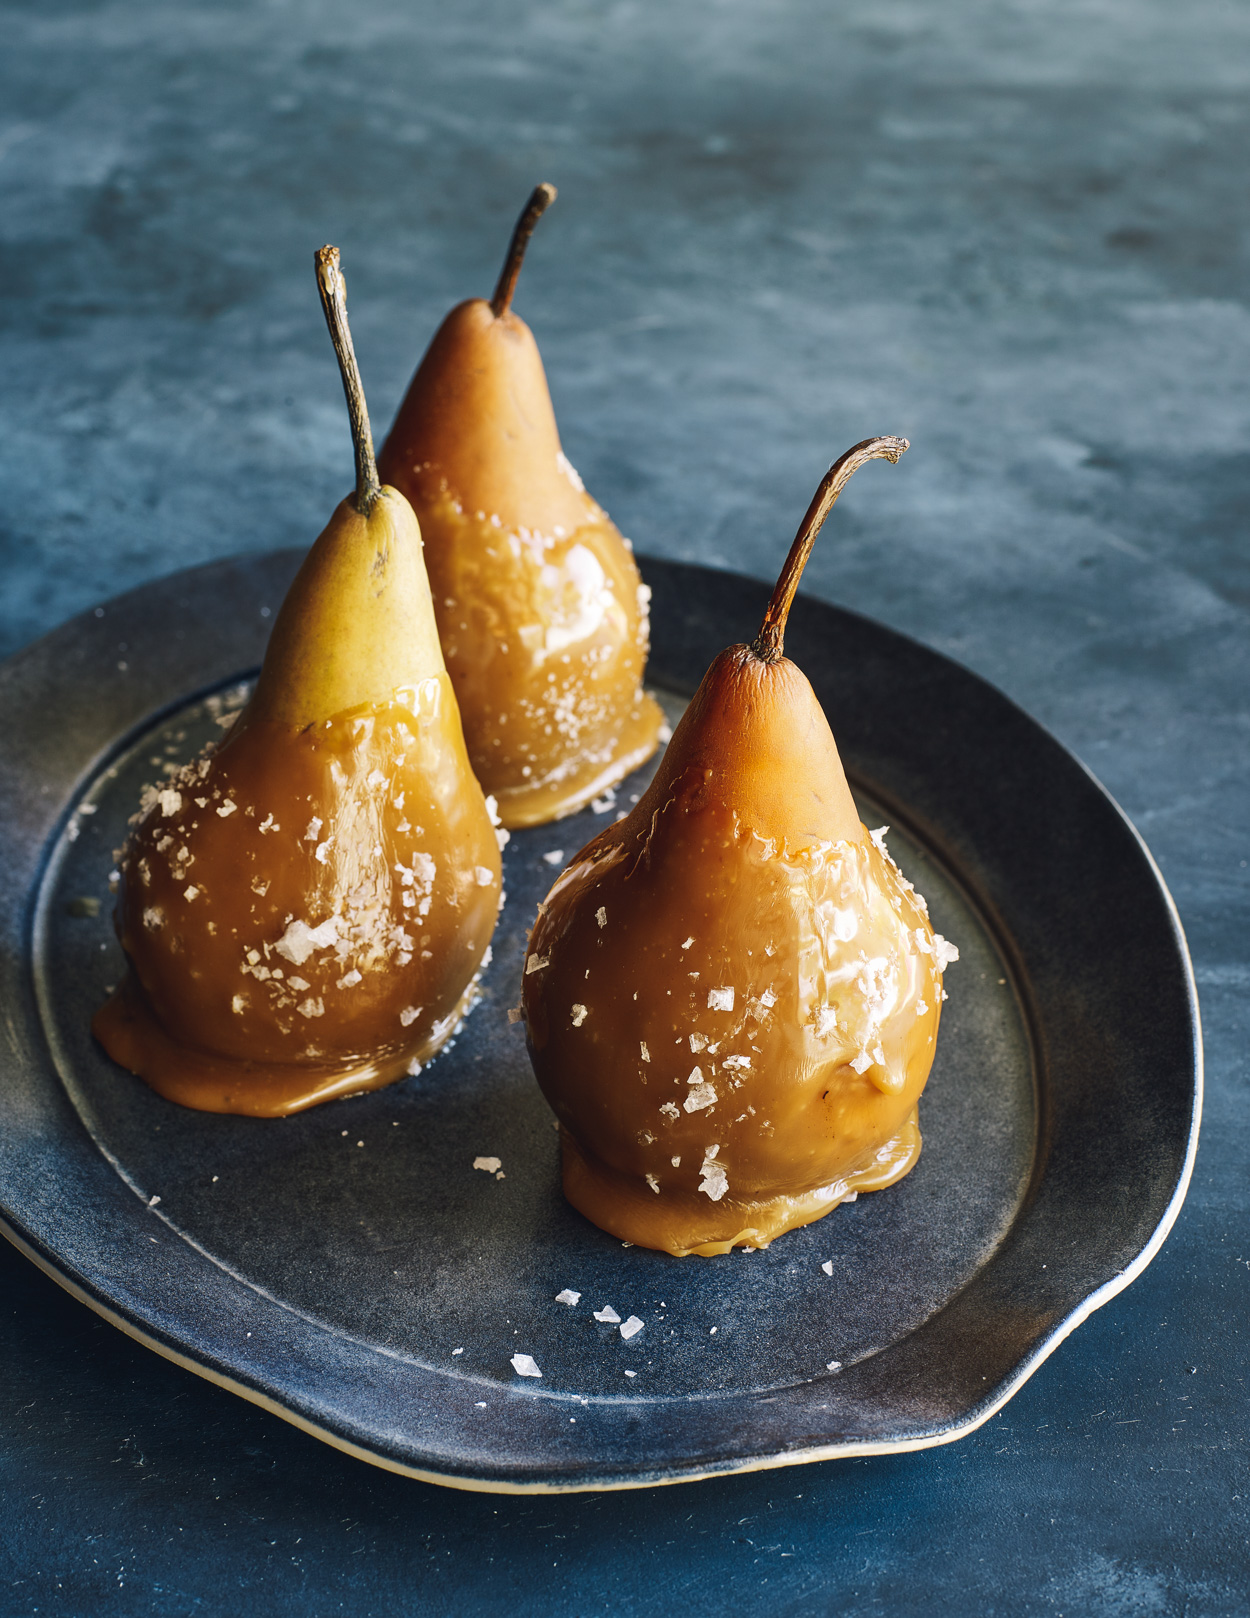 Los Angeles Food photographer - Cooking in Season Cookbook Caramel Pears  by Ray Kachatorian